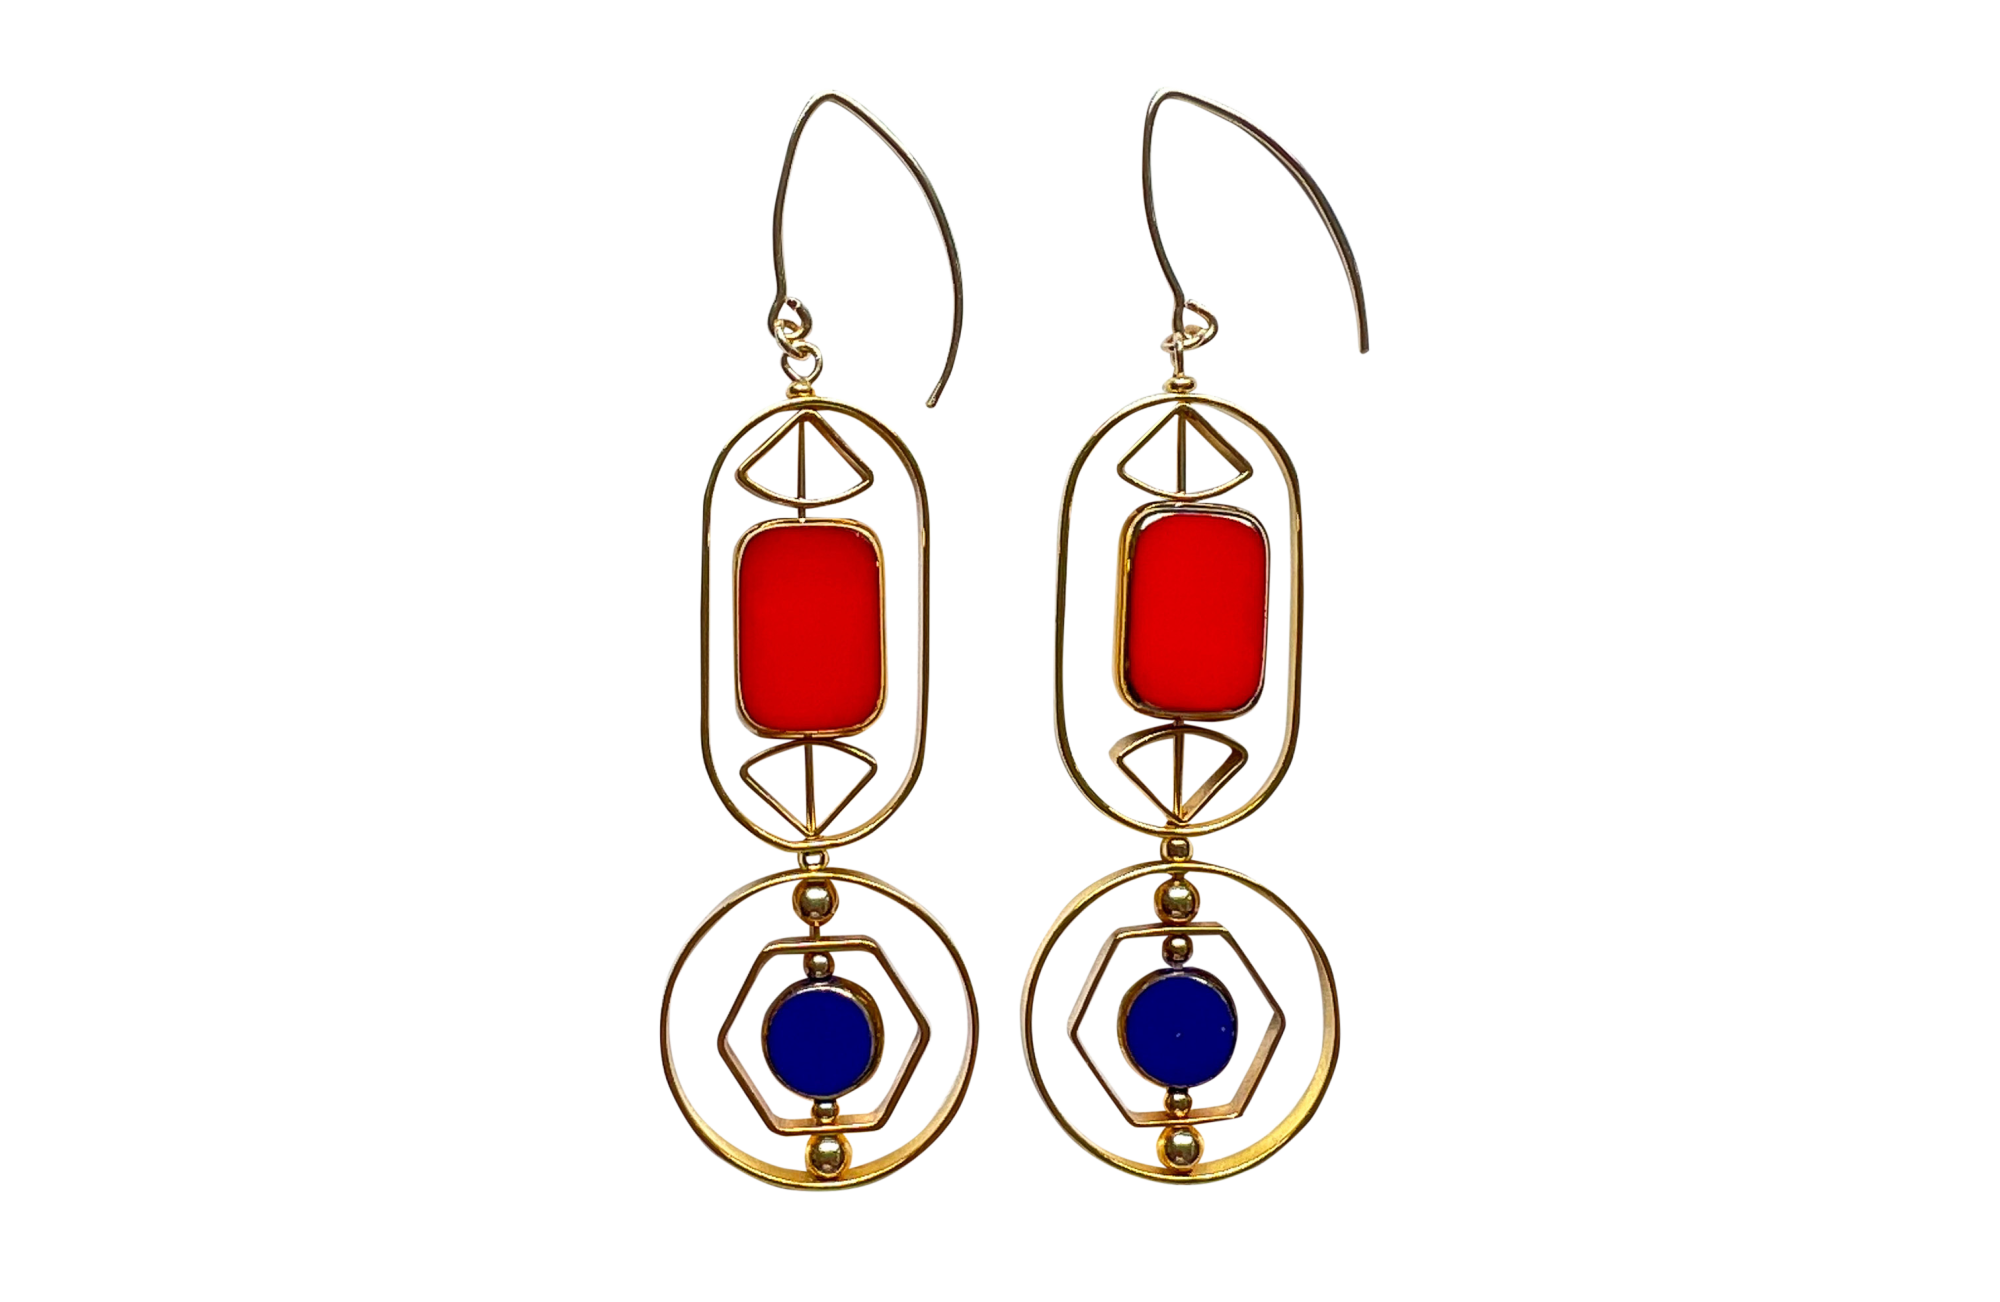 Gold drop earrings with red and blue glass beads from Aracheli Studio